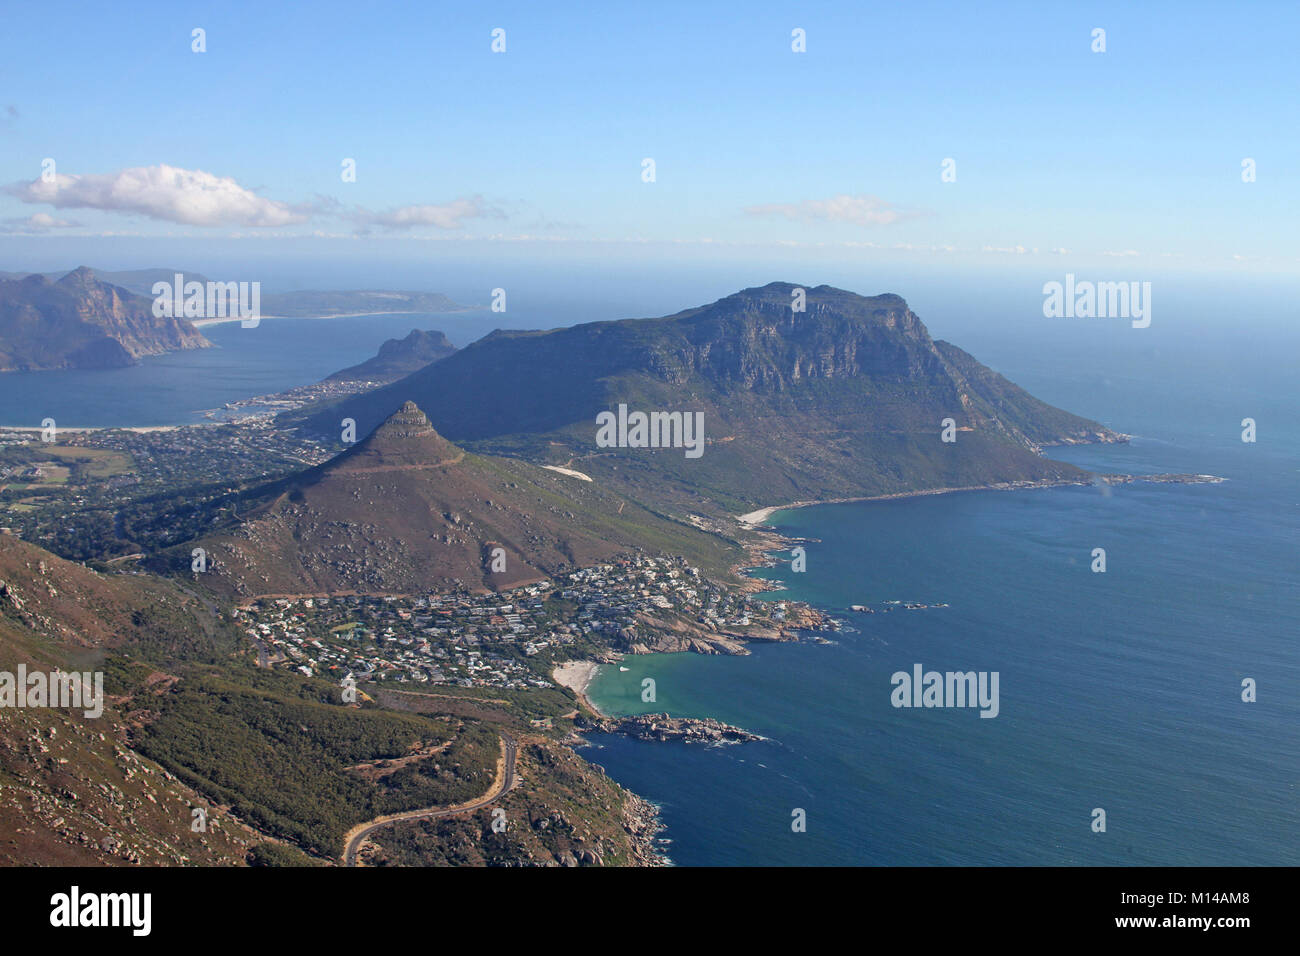 Helicopter view of Oudekraal part of Table Mountain, Hout Bay, Mount Rhodes, Mount Karbonkelberg and various beaches along Vicotoria Road, Hout Bay, W Stock Photo